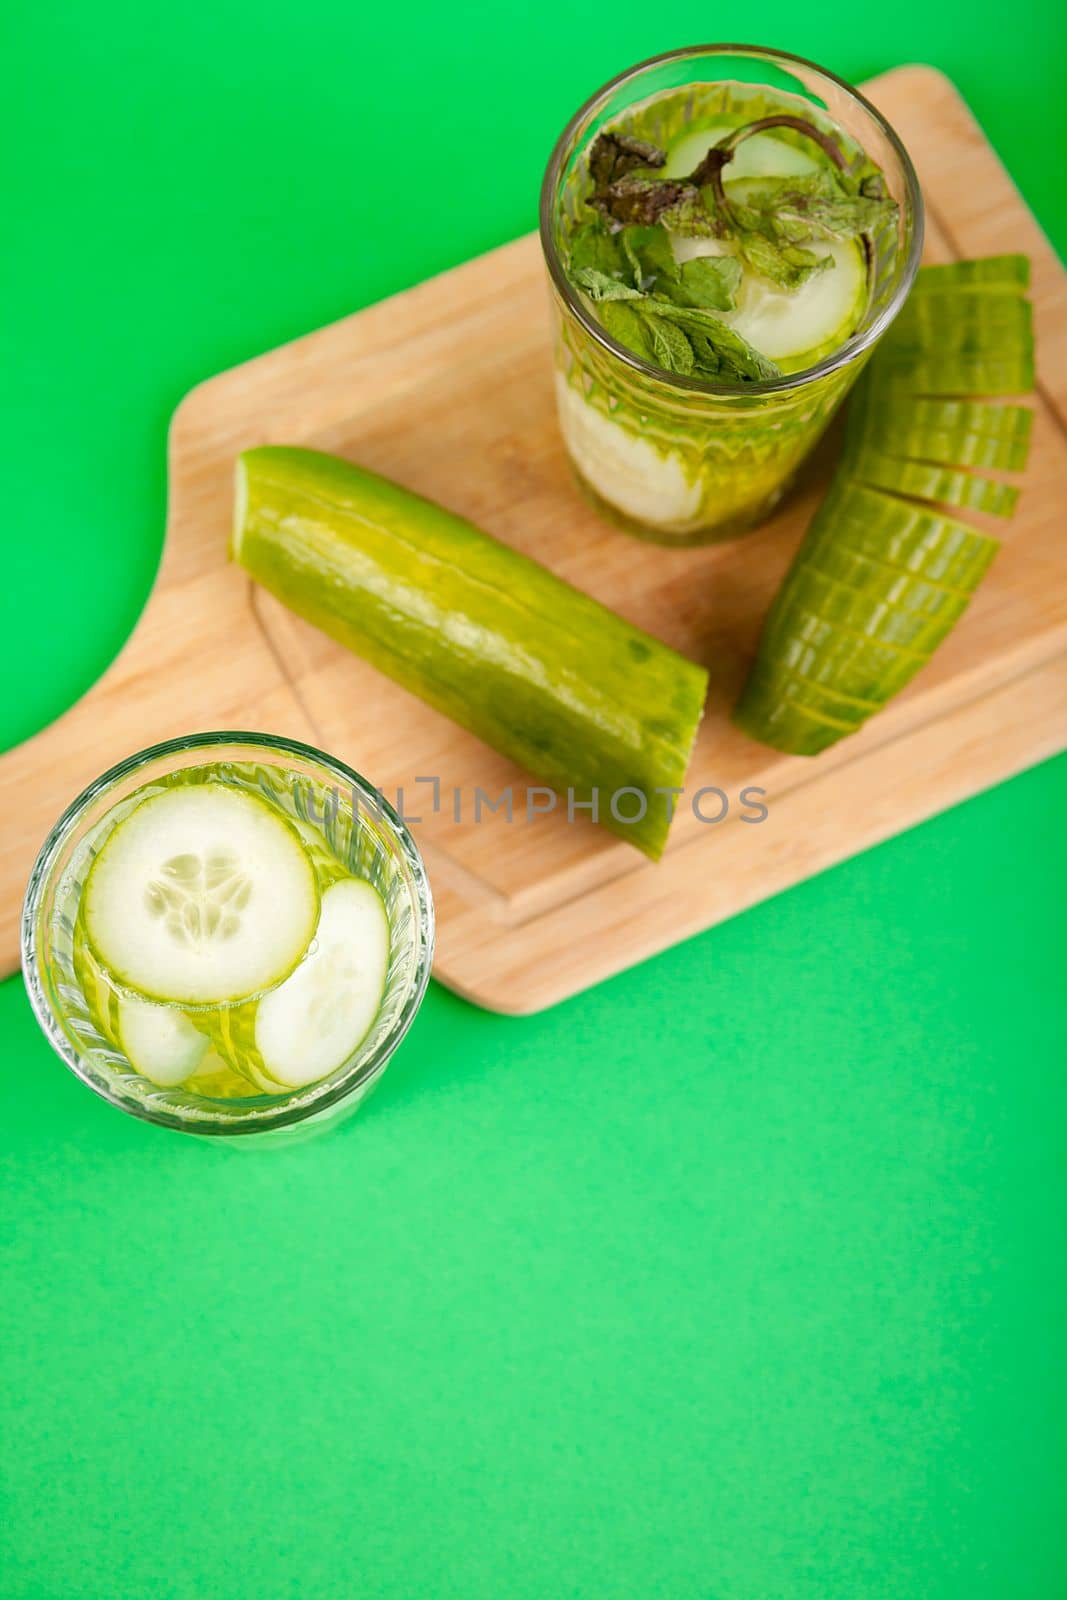 Homemade detox water from organic cucumbers in a glass against a green background